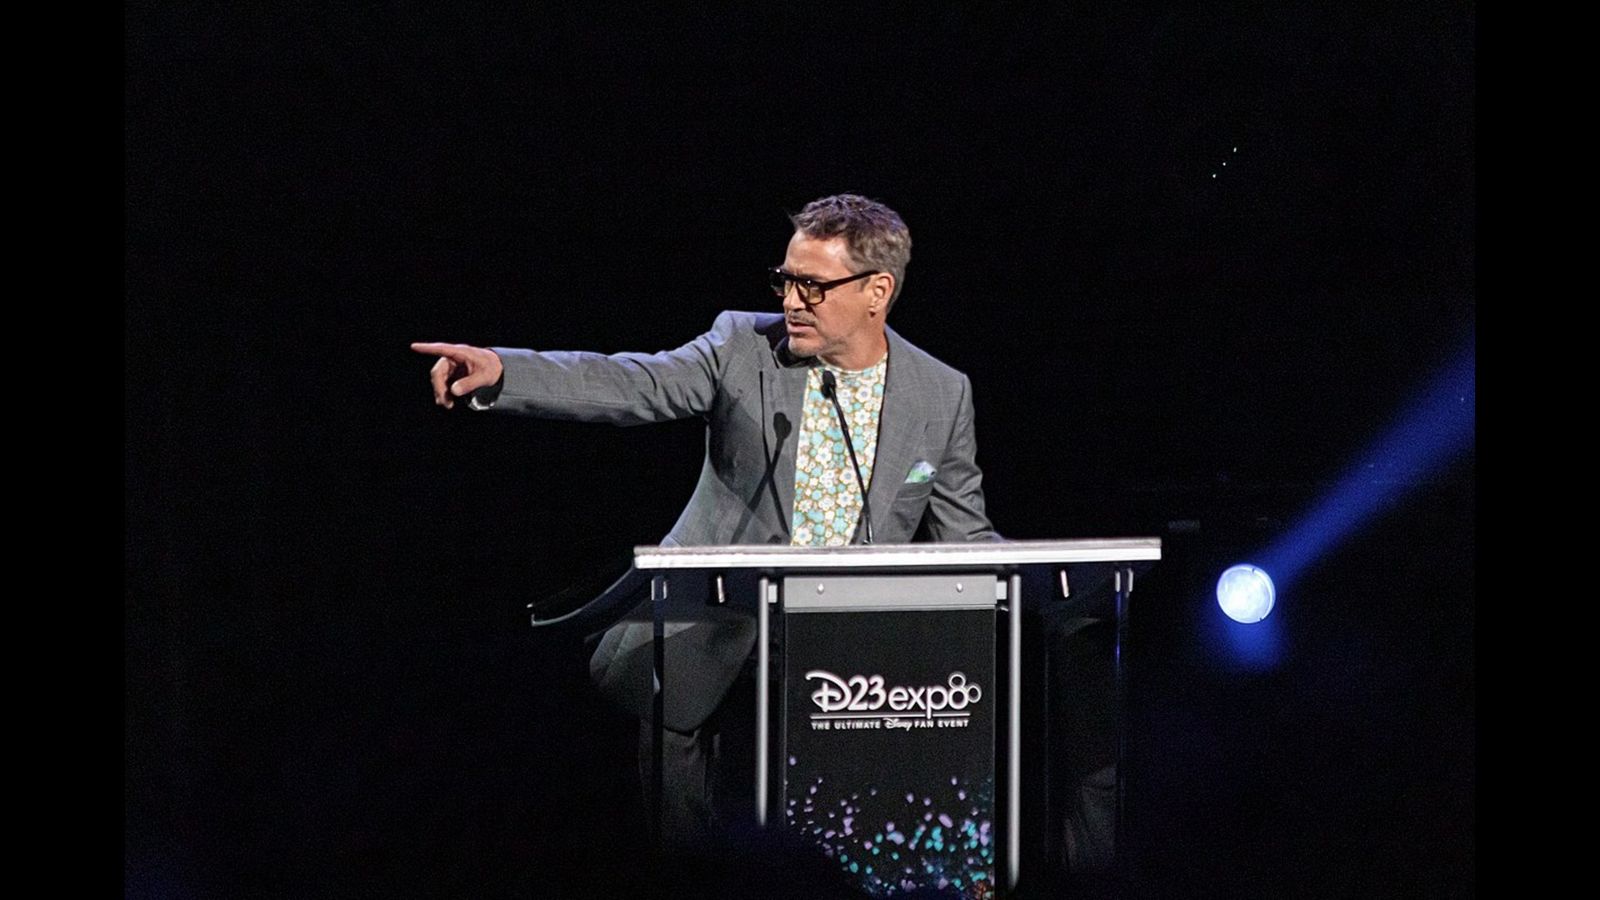 Actor Robert Downey Jr. talking on stage at the 2019 Disney Legends Awards Ceremony